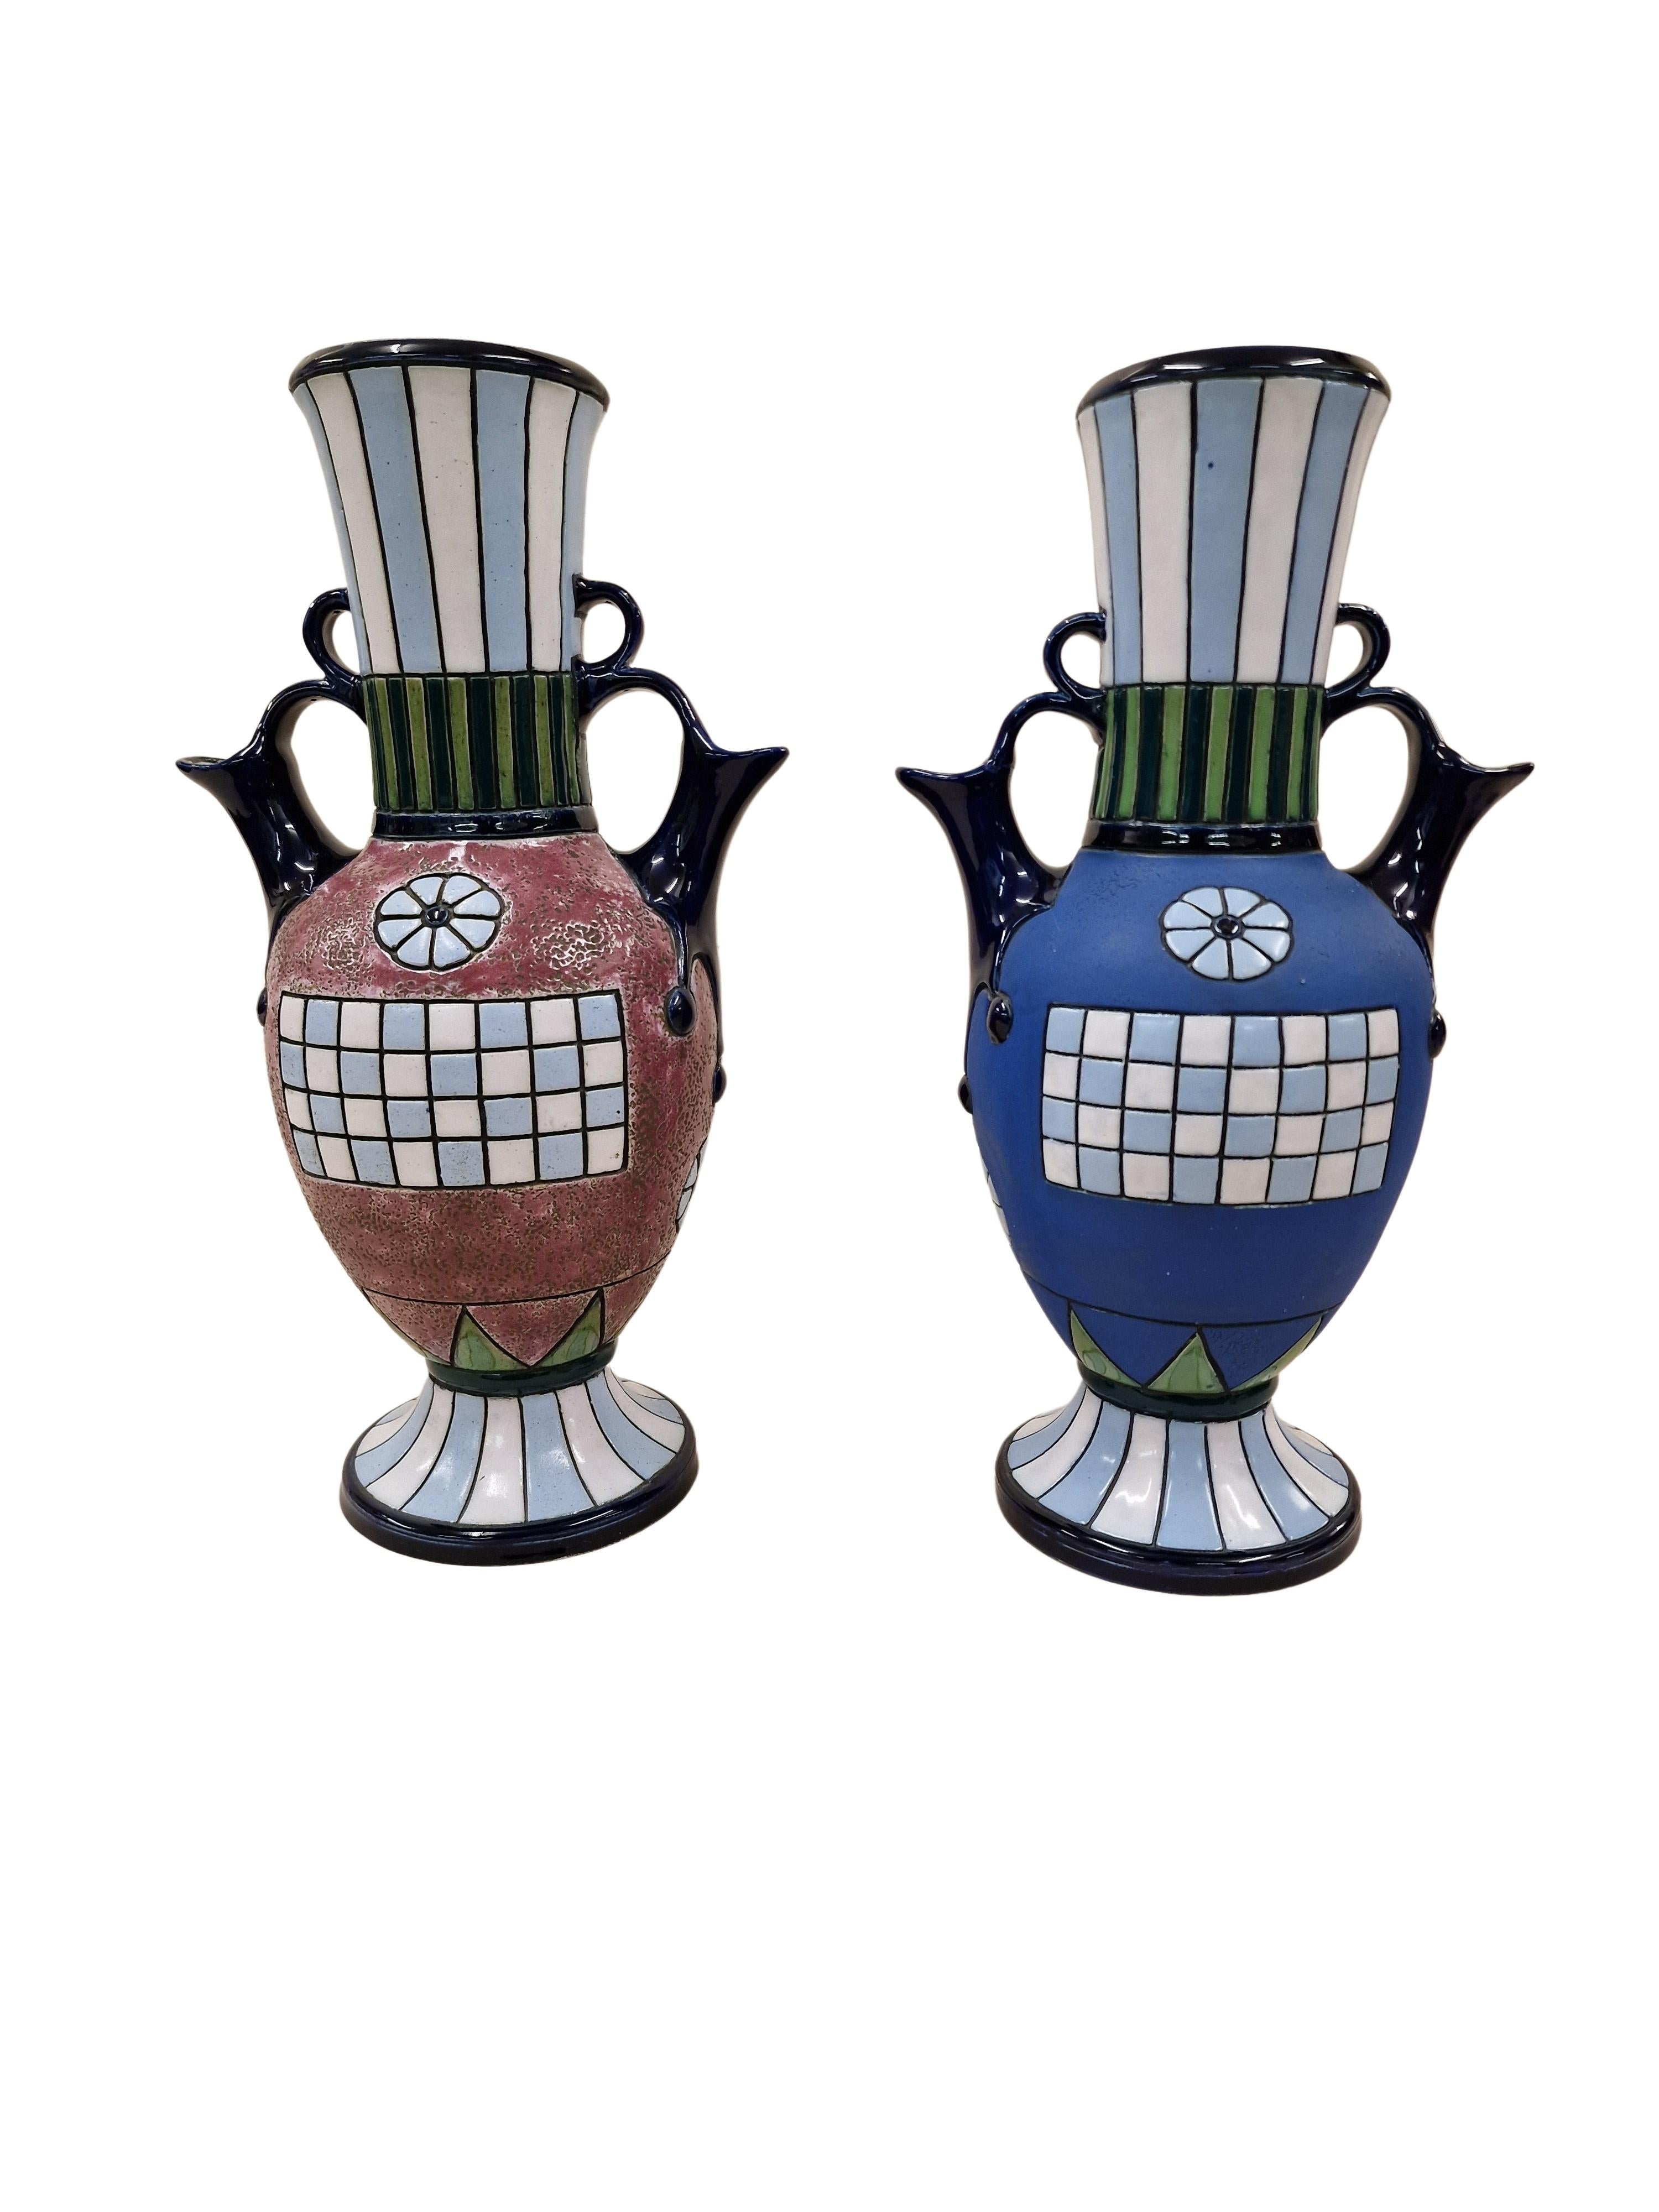 Pair of very rare vases / jugs by wellknown manufacturer Amphora, which can be used on both sides, made around 1915 in Czech Republic. 

The extraordinary pair is of the same size but different colors and decor. One has a red base color and shows a